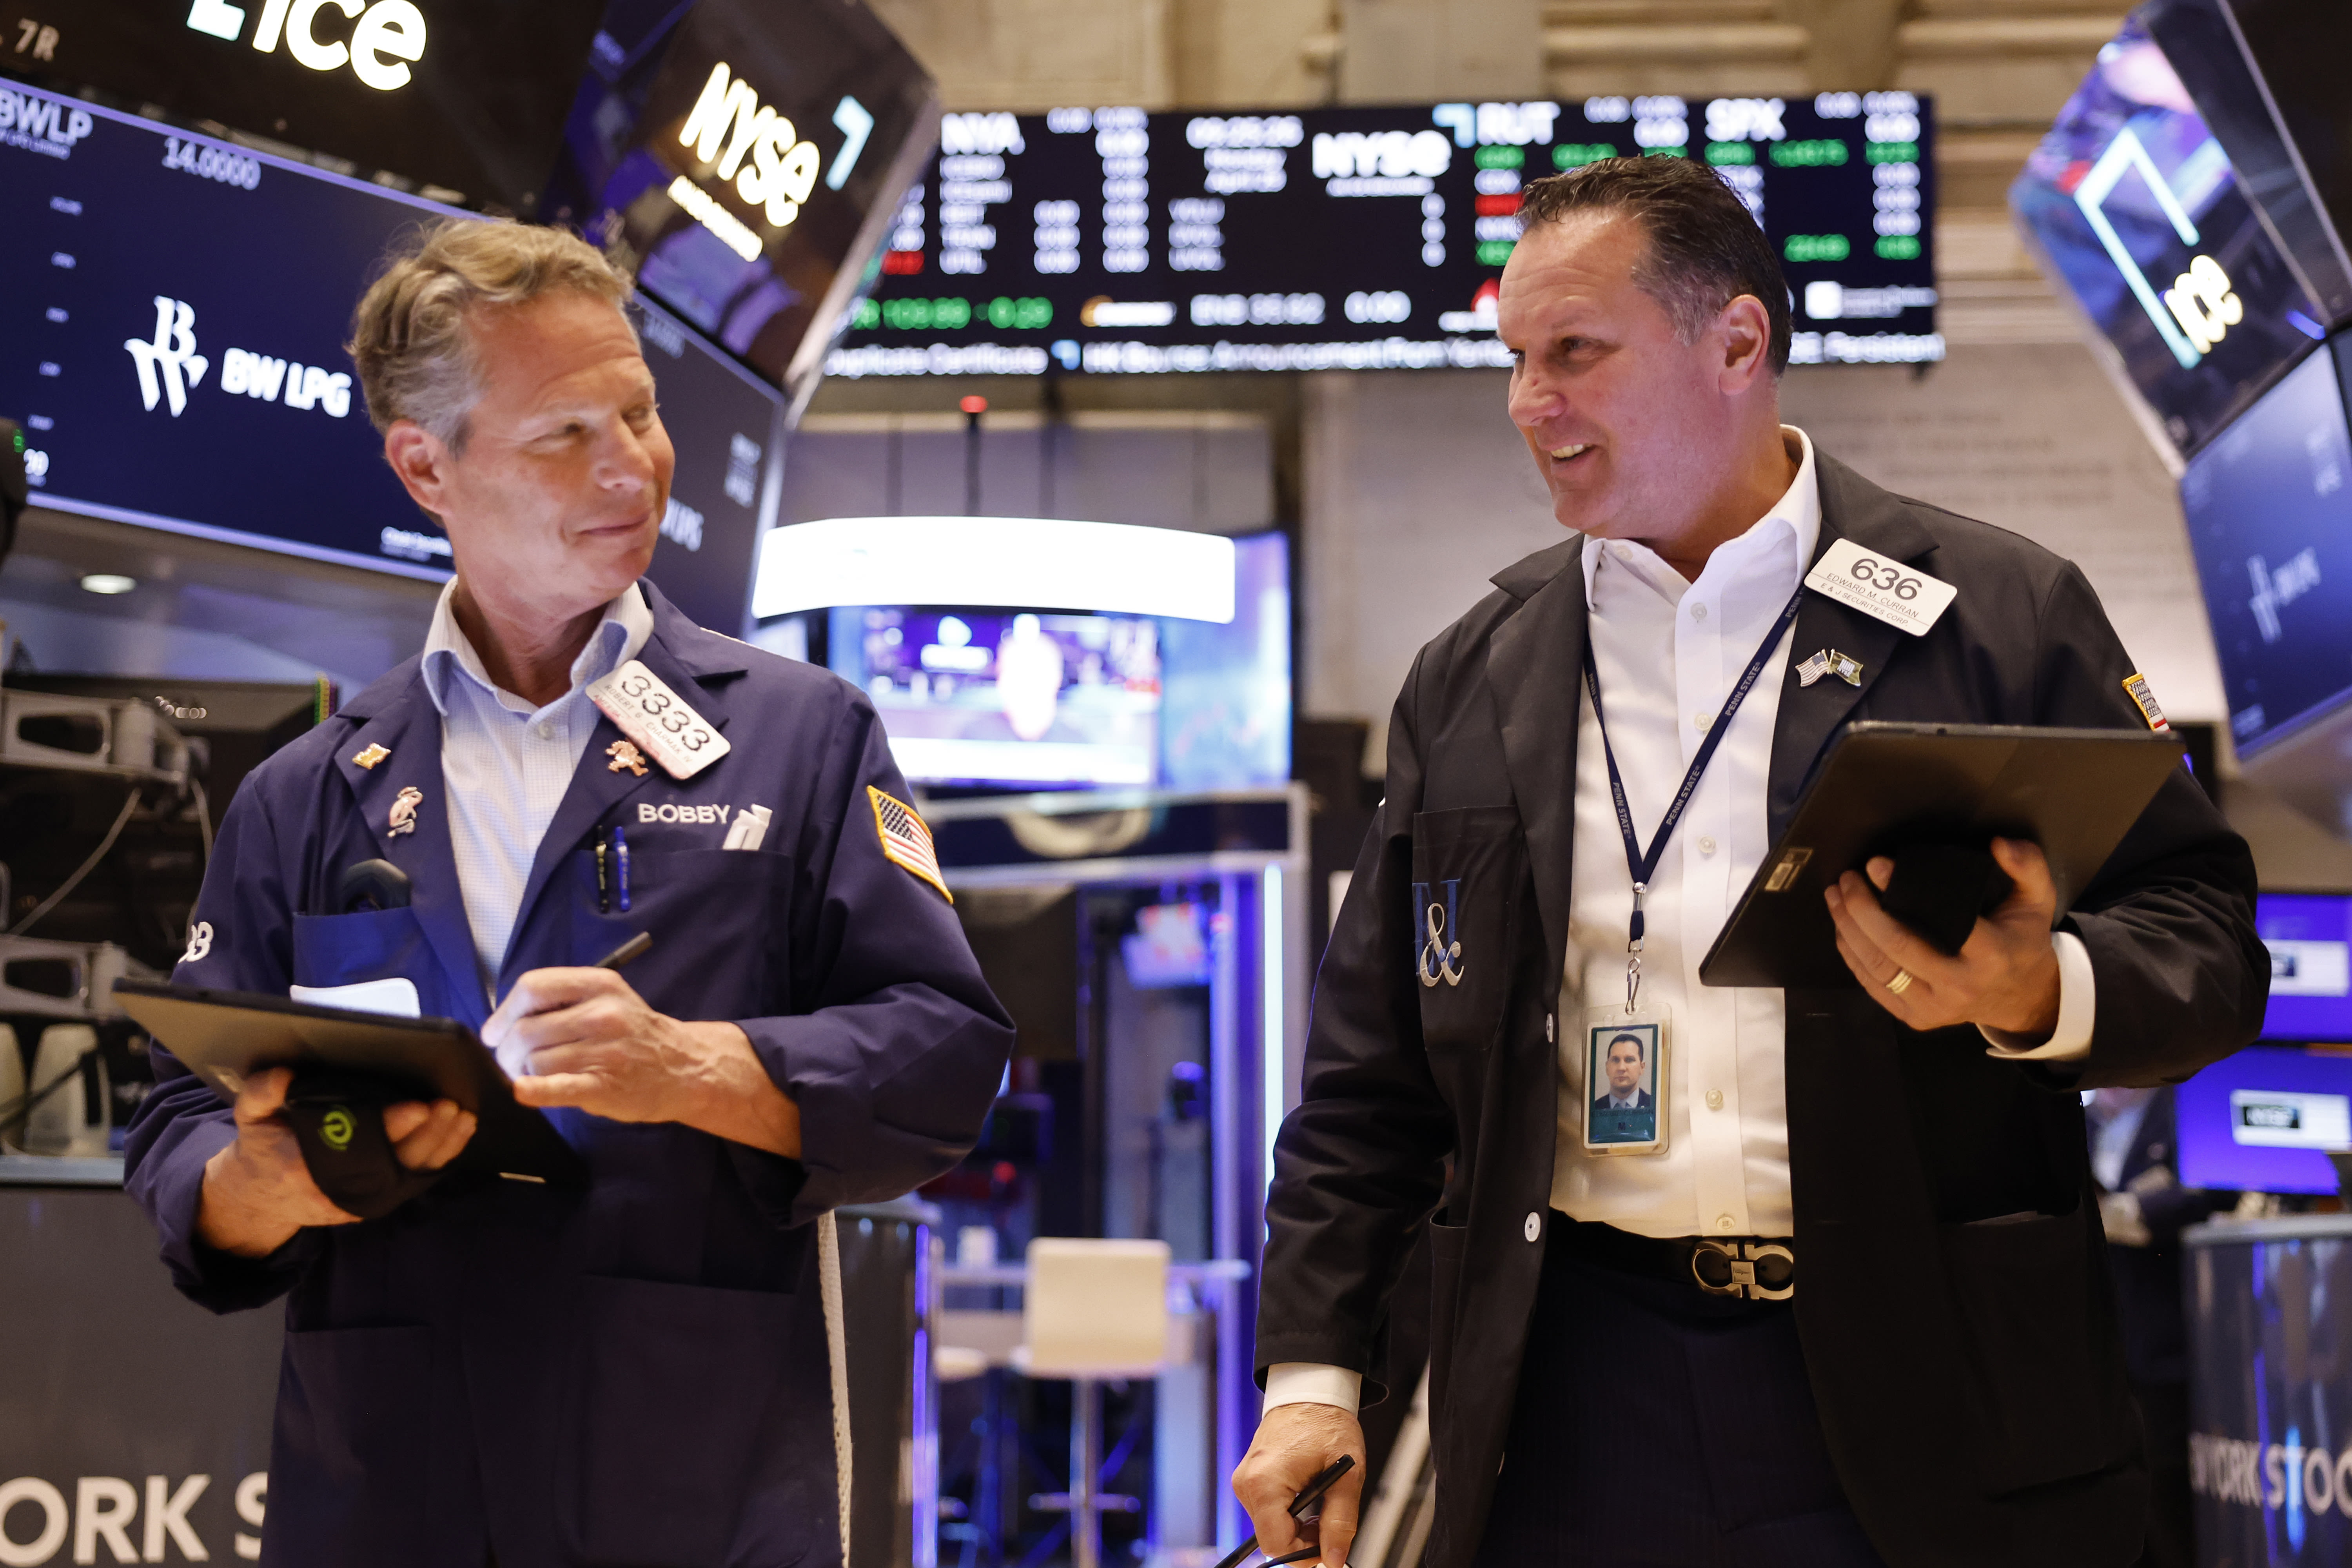 Stock market today: Stock futures surge after soft jobs report, Apple earnings triumph